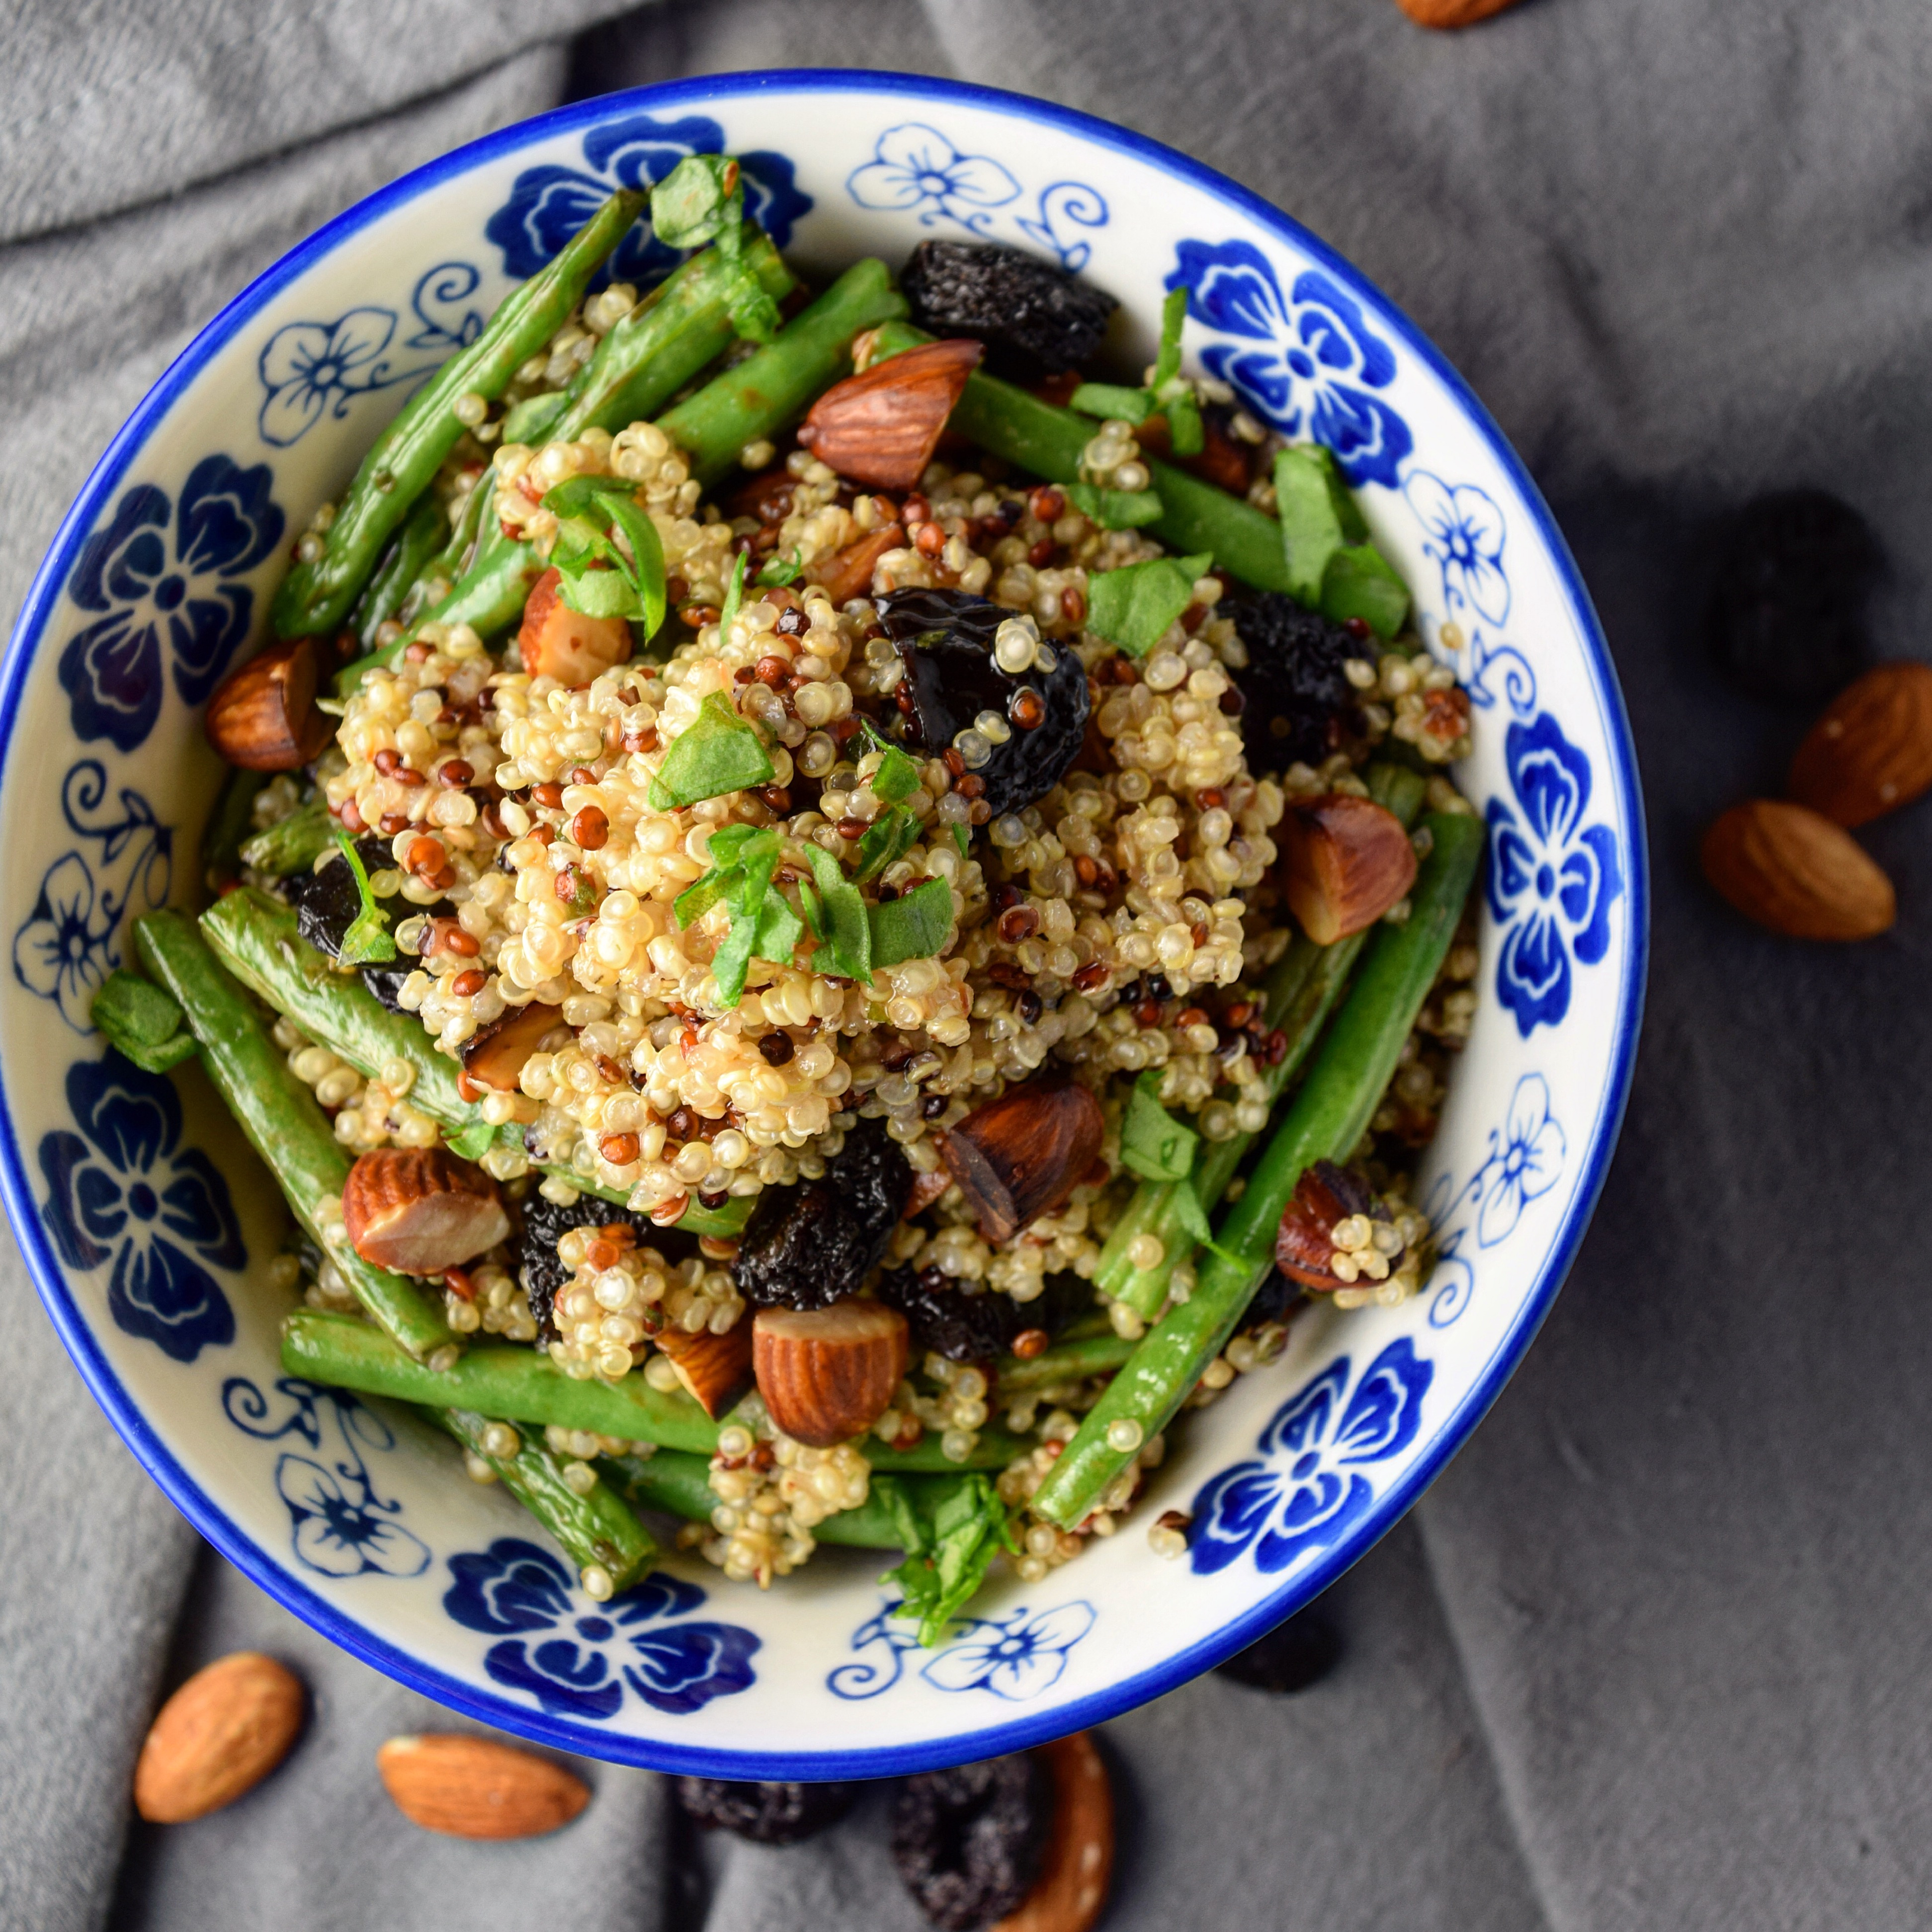 Quinoa Bowl with Green Beans, Almonds, and Cherries